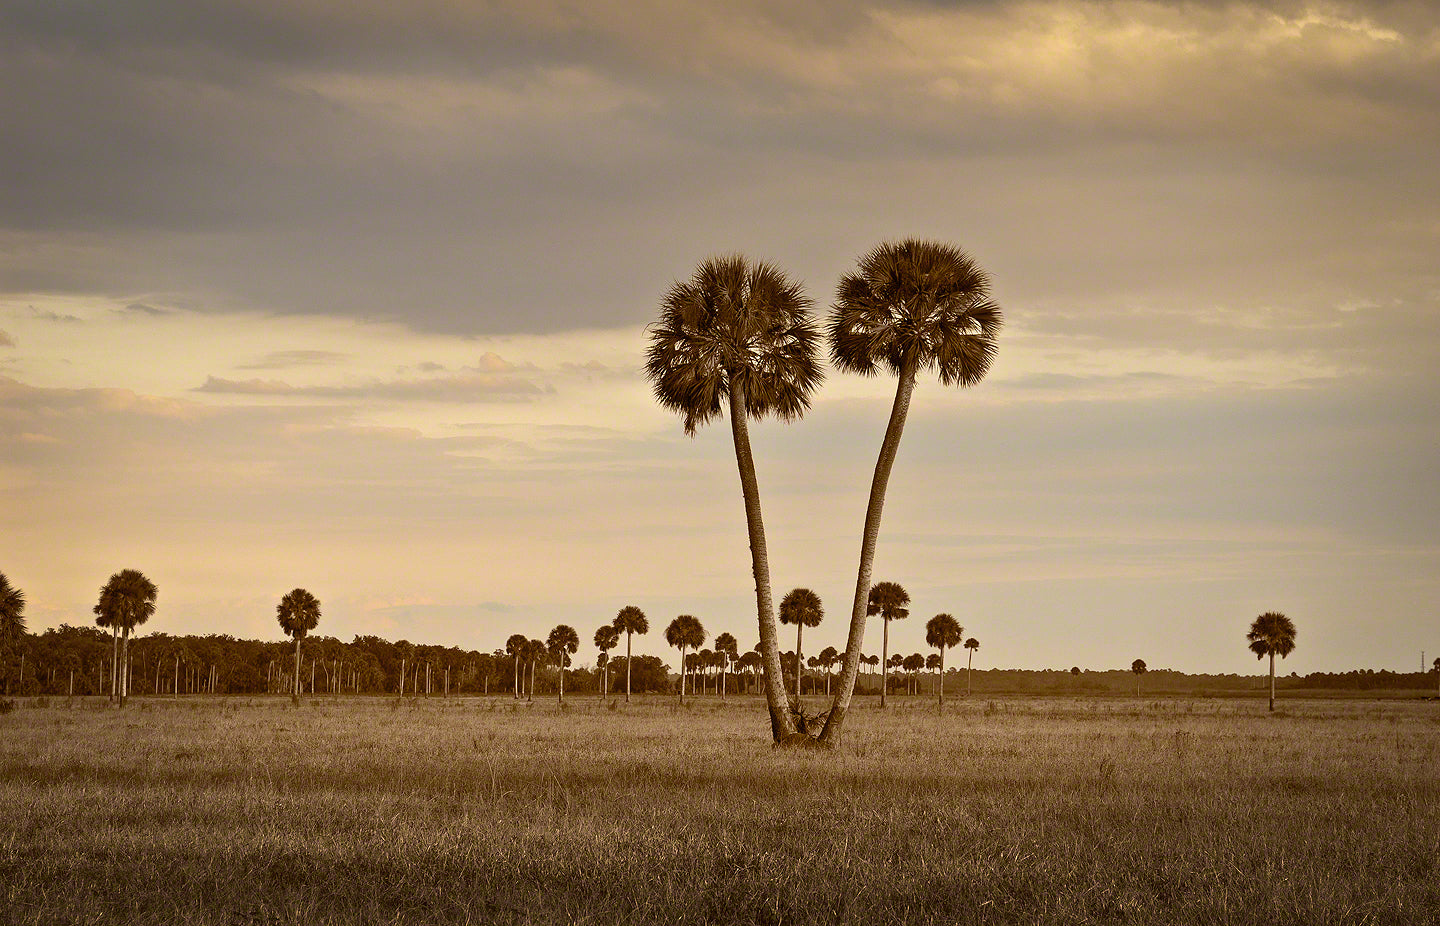 A landscape photograph by Mike Ring of two cabbage palm trees